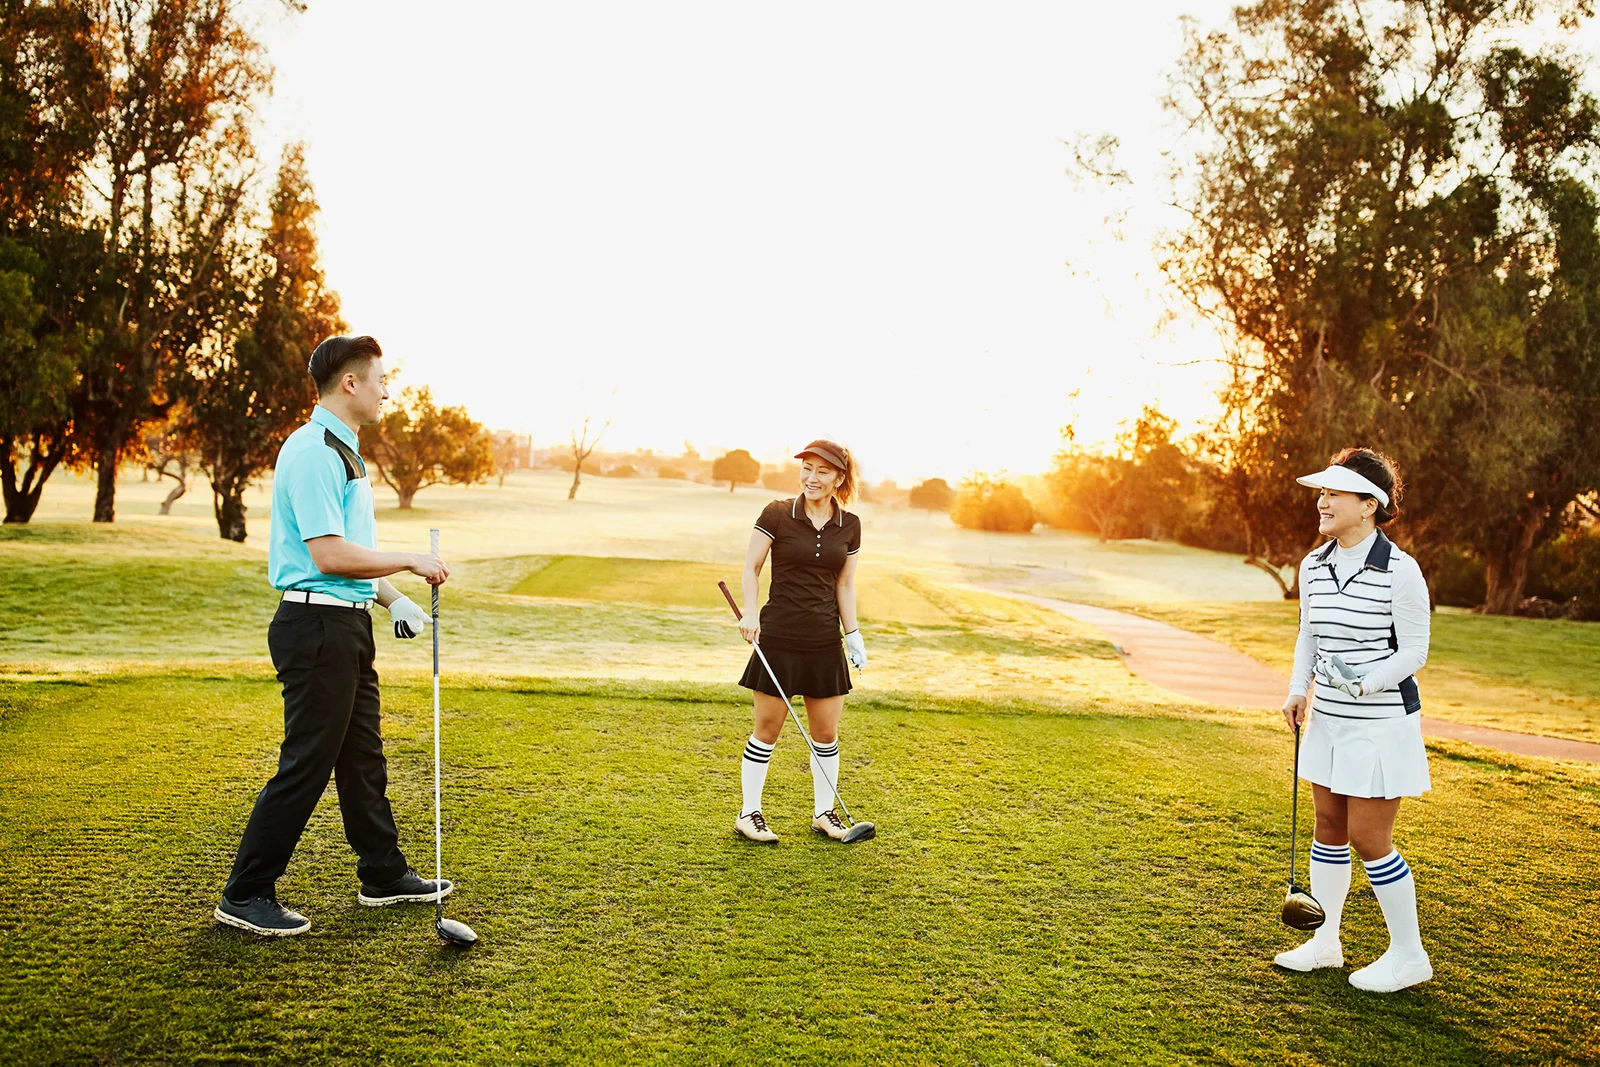 Why Scottsdale's public golf courses are the greatest in the US: A desert playground